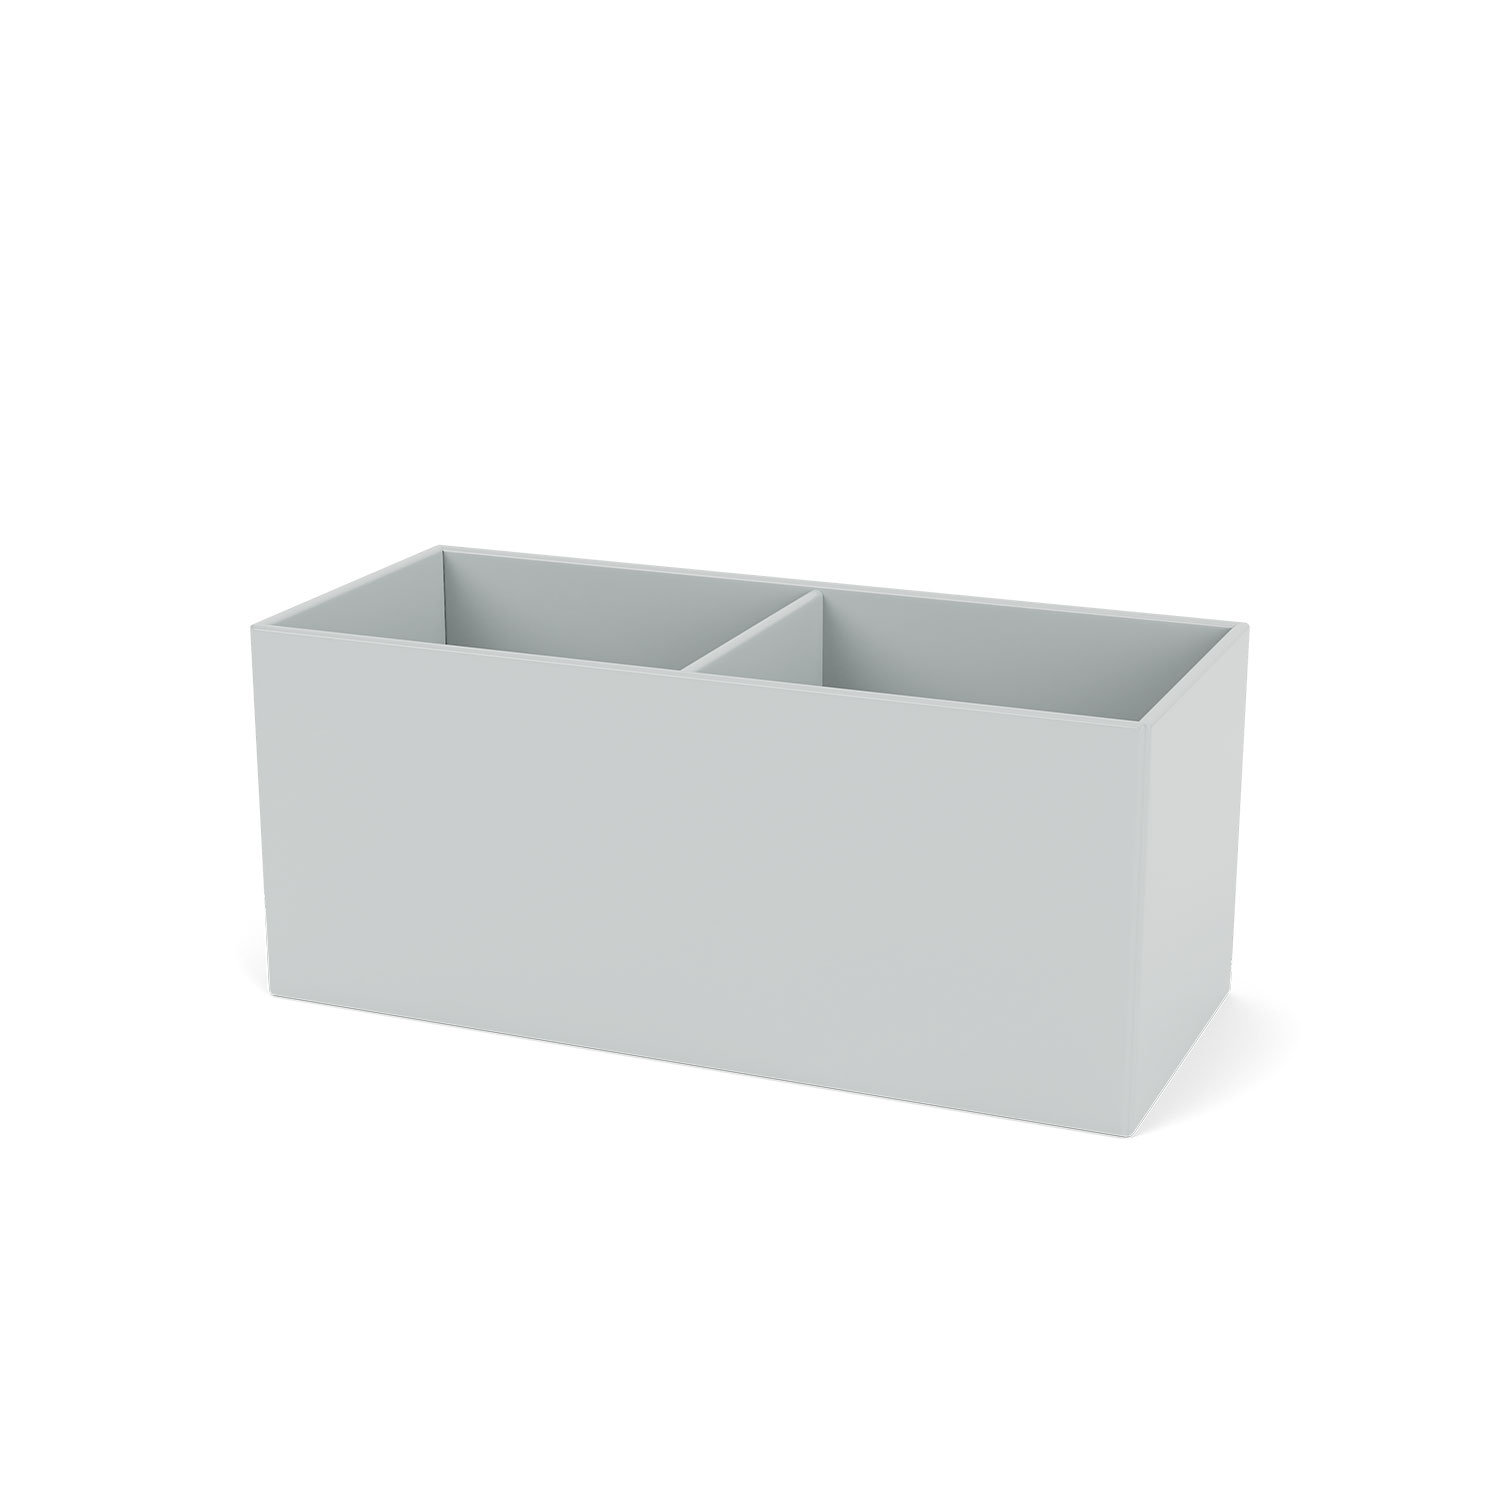 Plant box LT12 Standing, Oyster